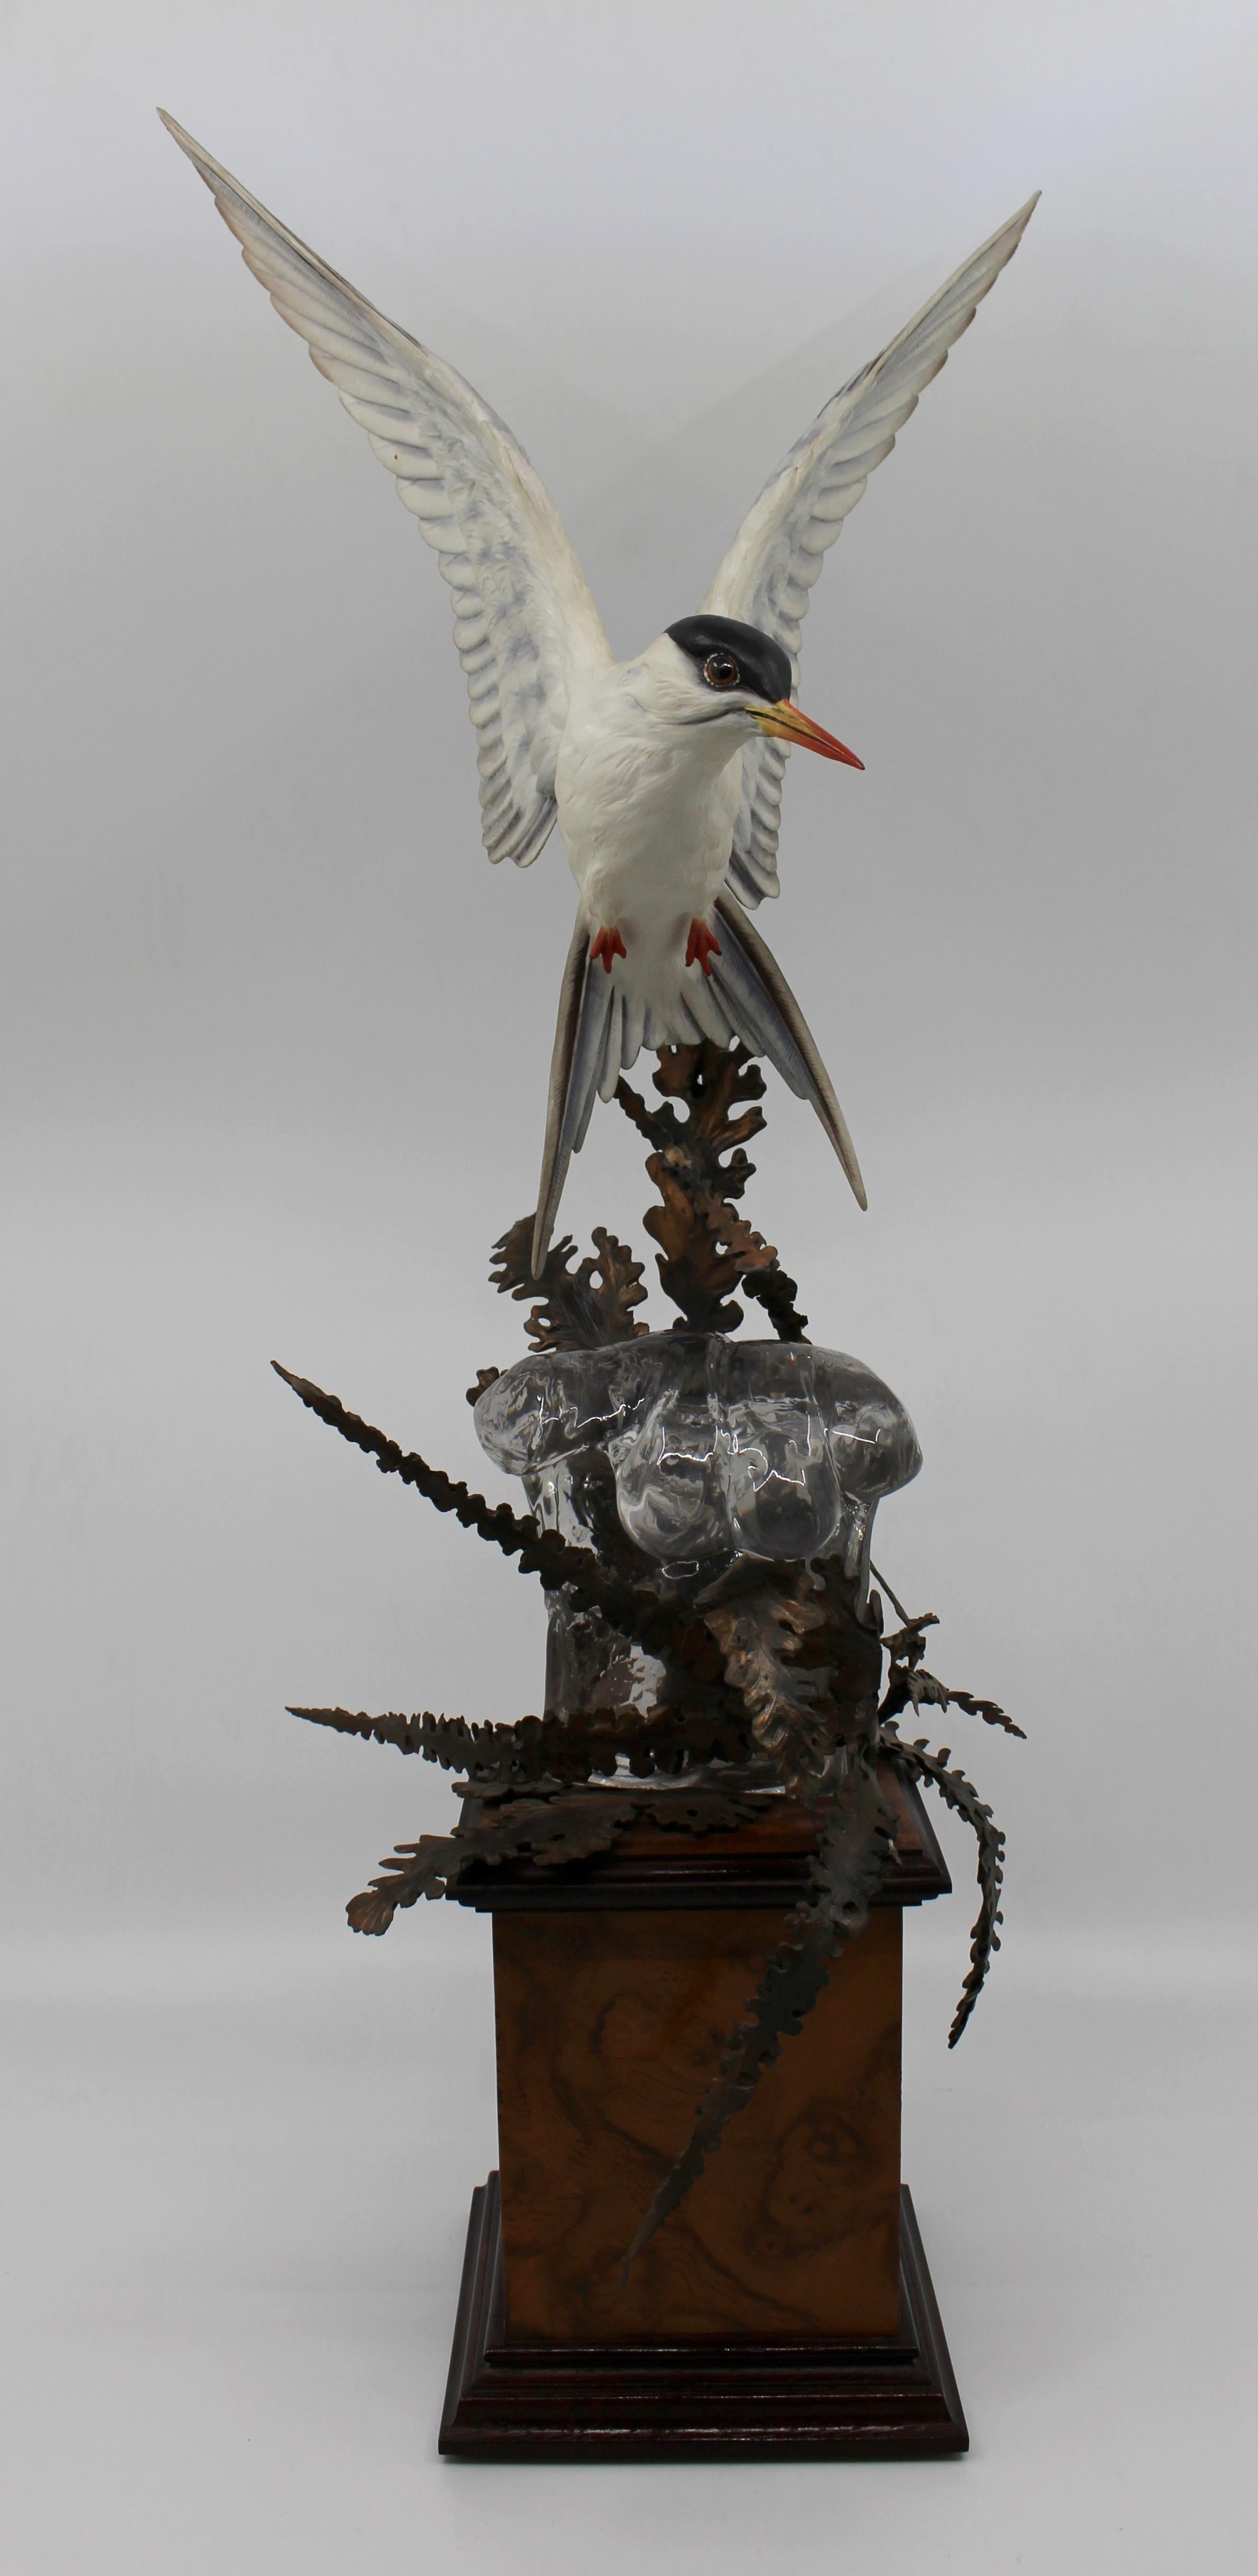 Manufacturer Albany Fine China Ltd England, Worcester
Title Arctic Tern
Composition porcelain sculpture on bronze mount with marble base
Measures: Height 54 cm / 21 1/2 in
Modeller David Burnham-Smith
Limited edition of 500
Condition: Very